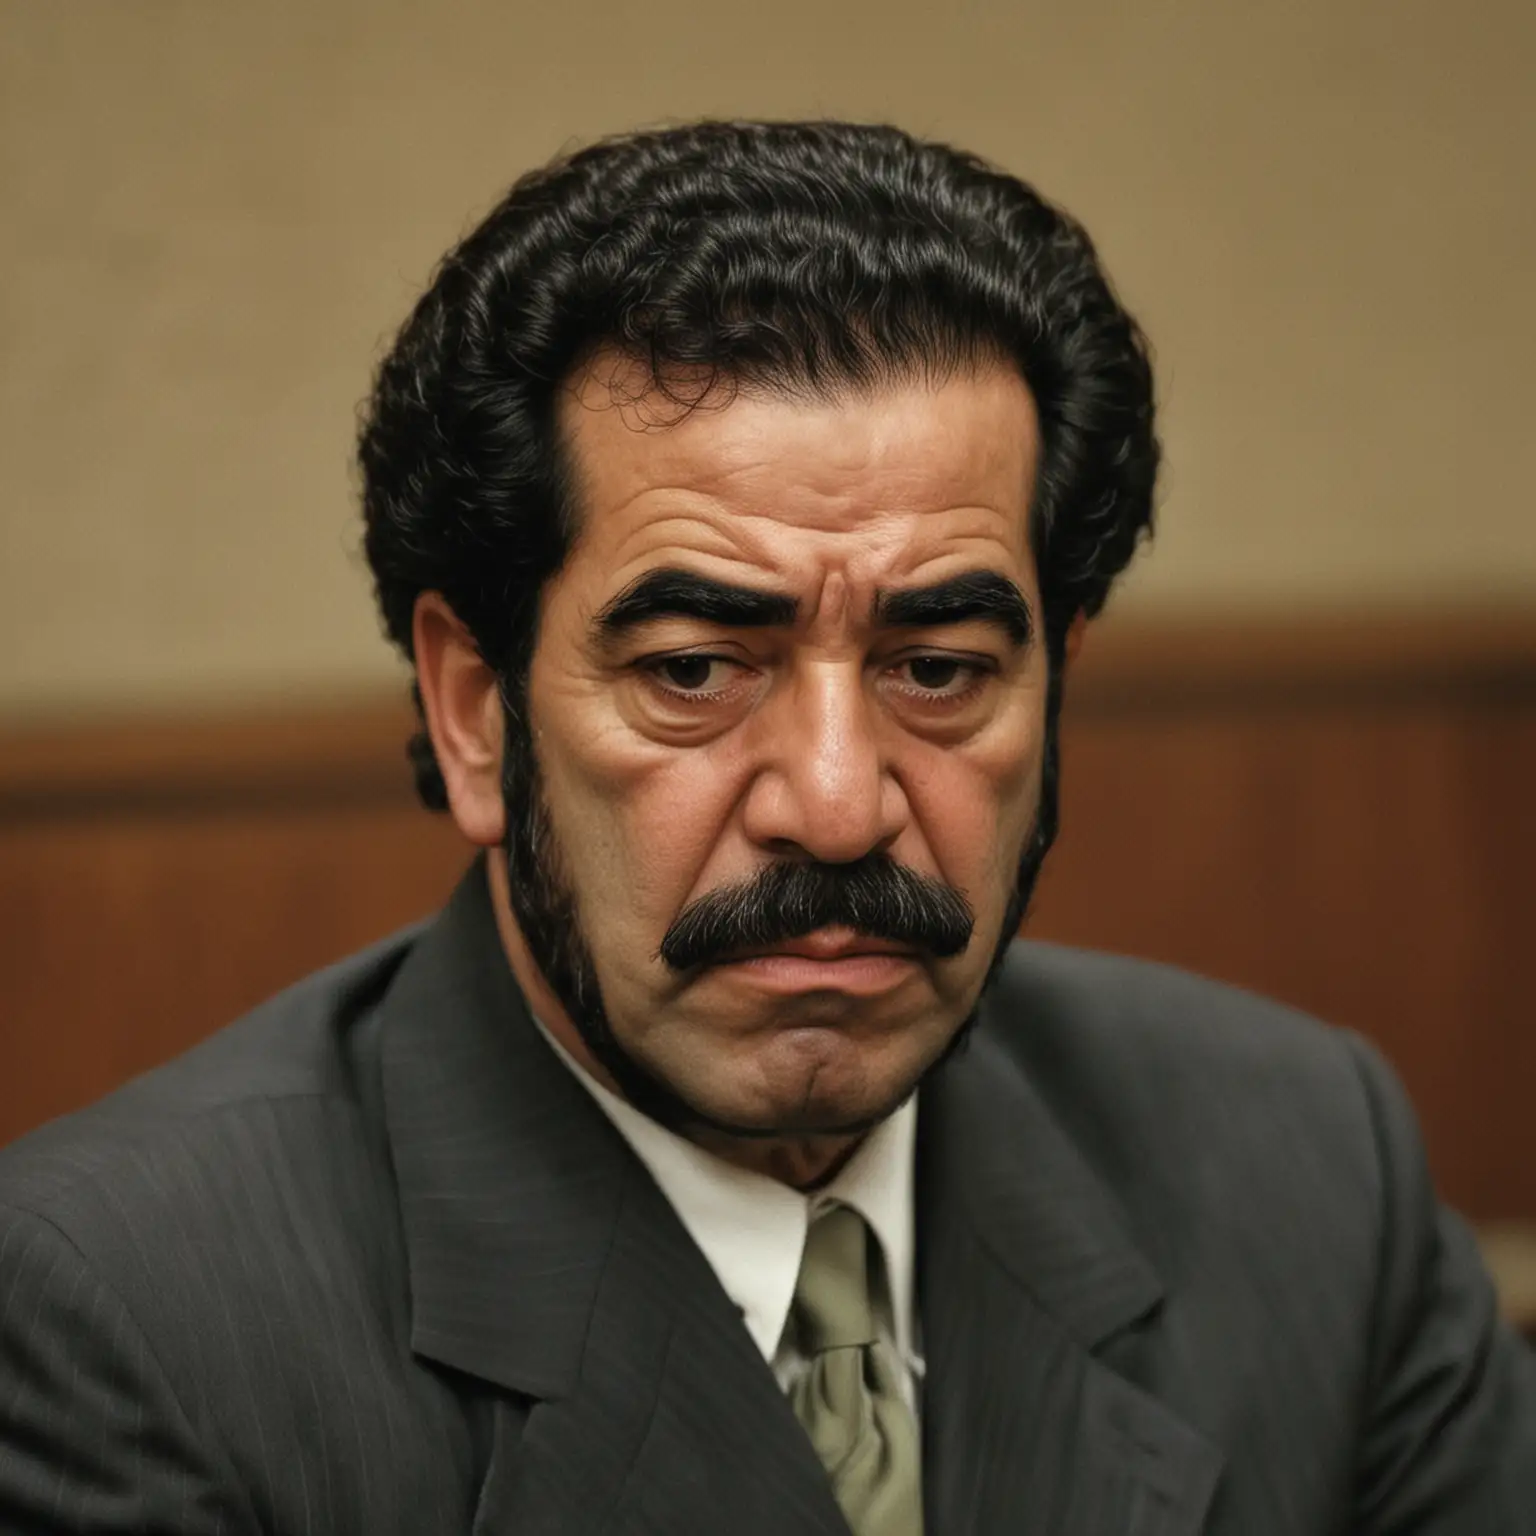 Image of Saddam Hussein in the courtroom during his trial, with a stern or defiant expression